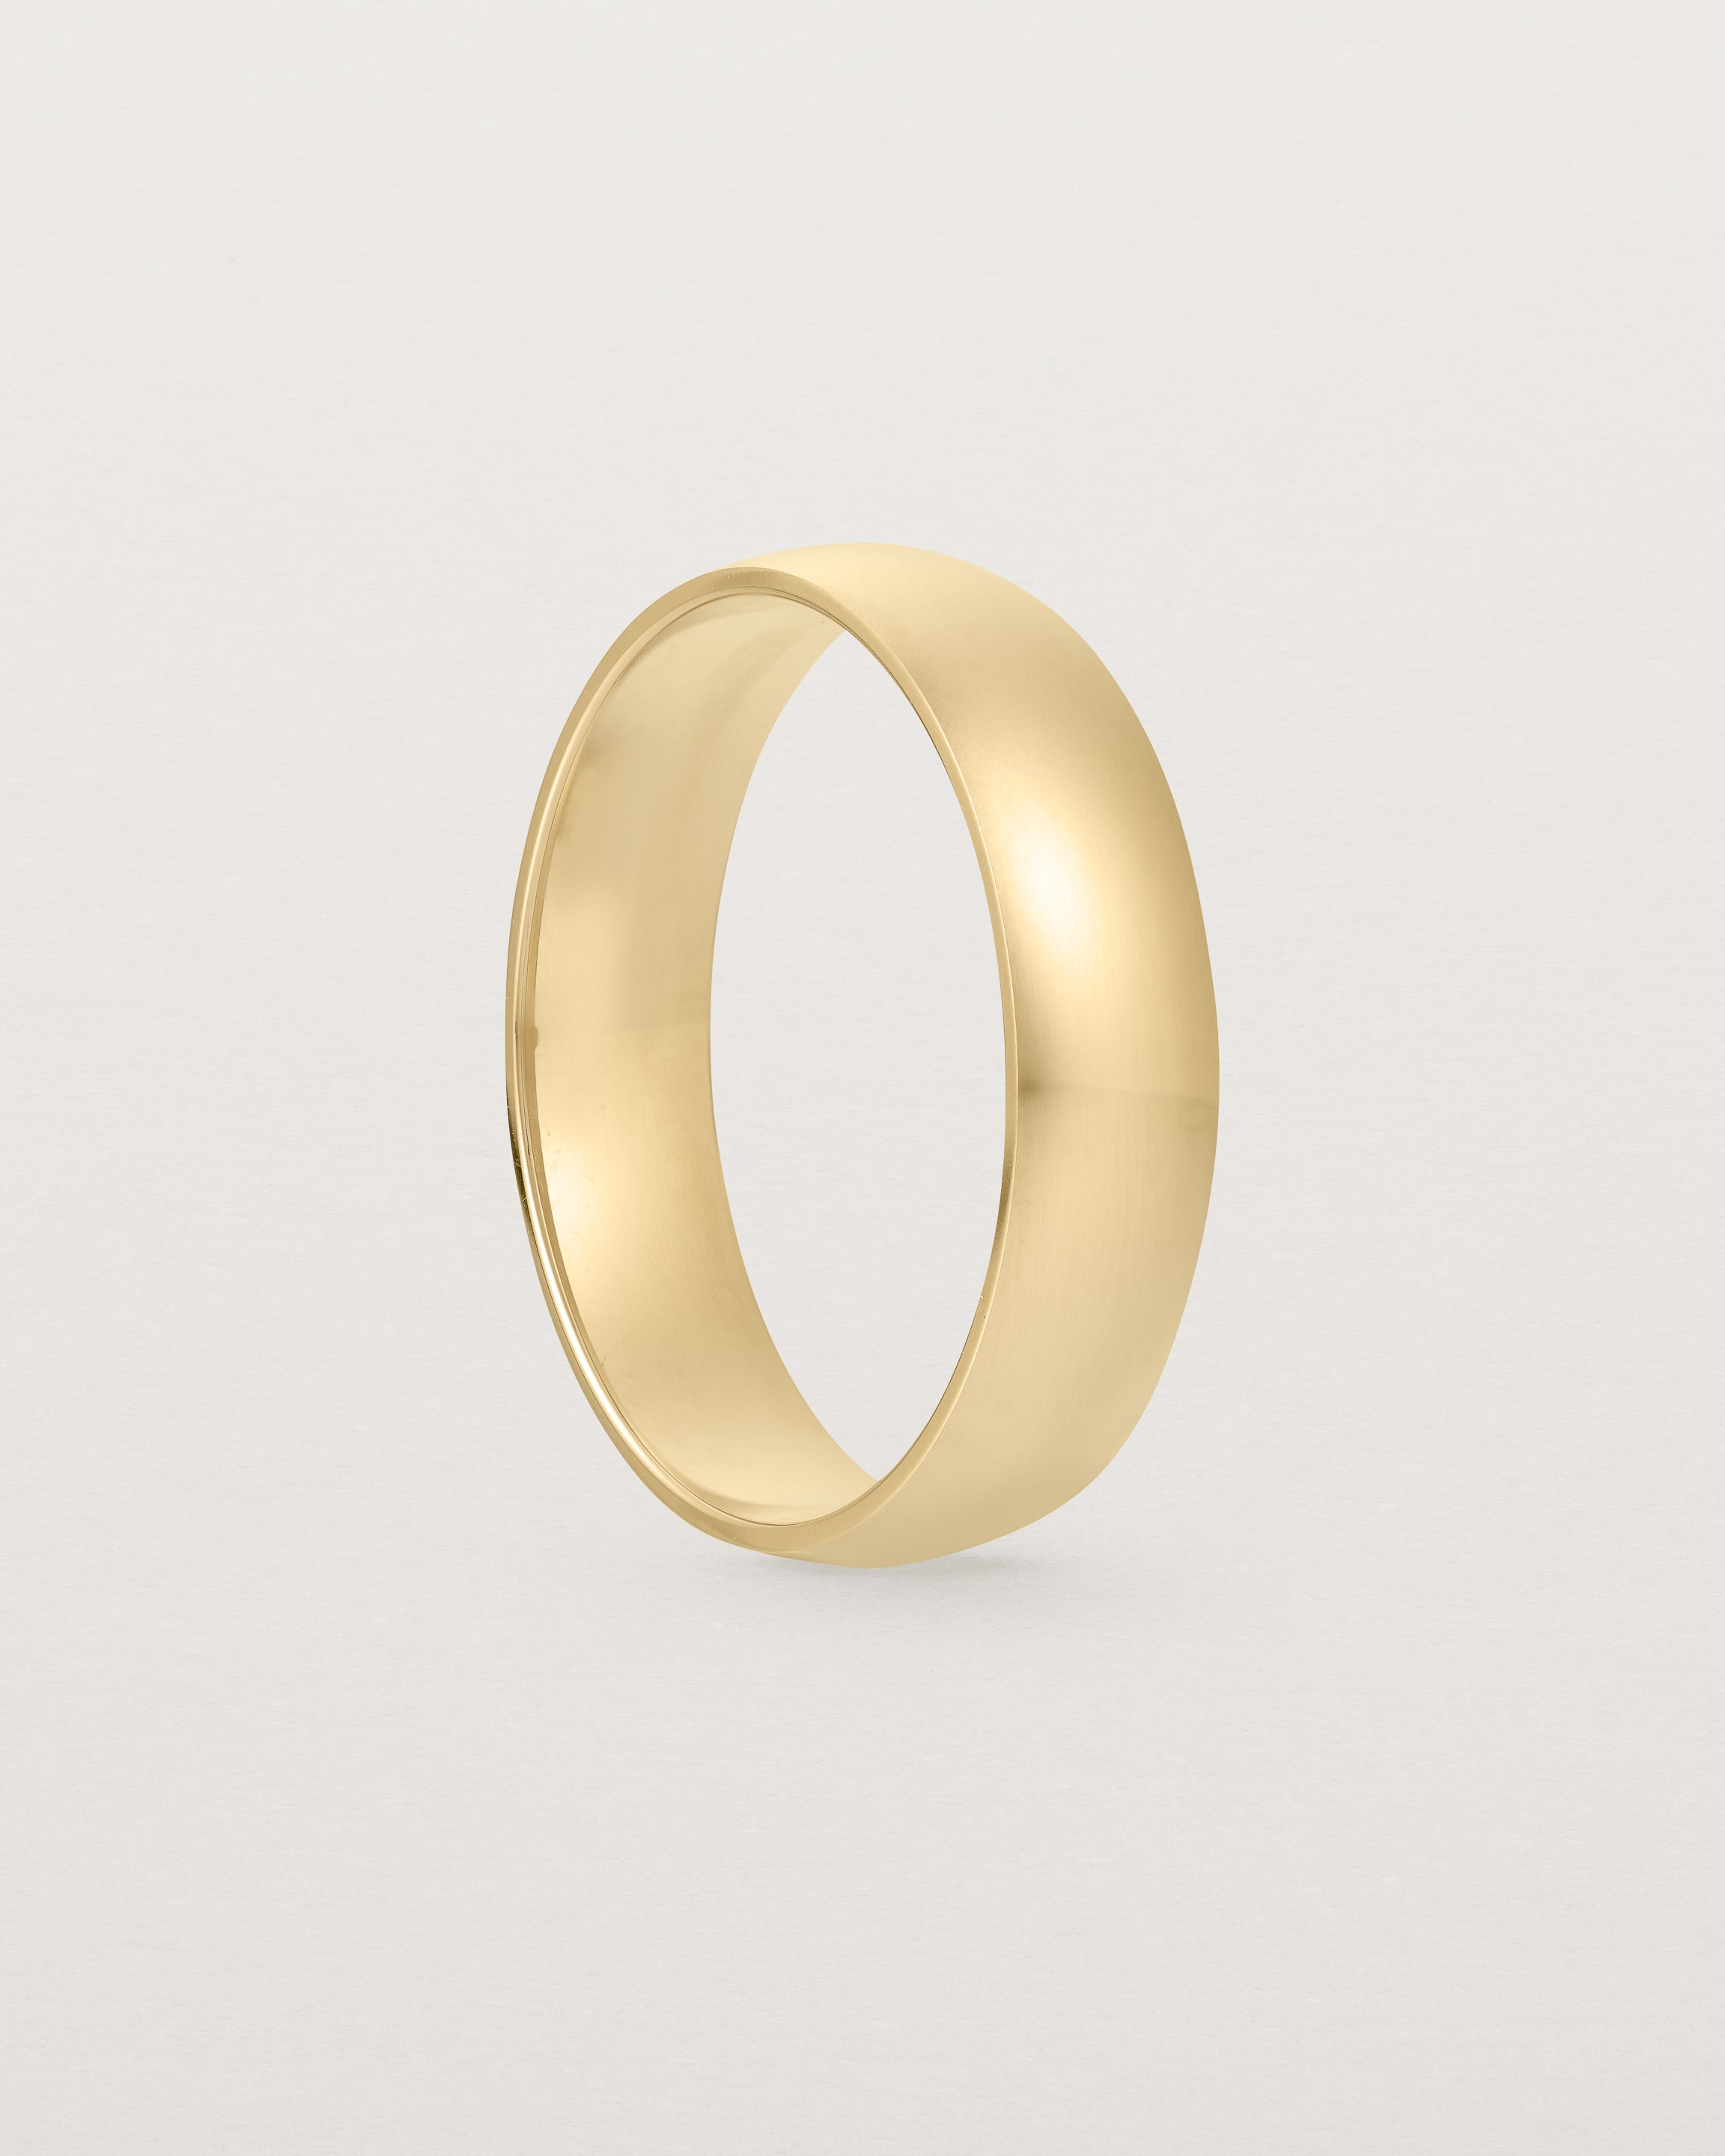 A classic 5mm wedding band, our most popular width, crafted in yellow gold